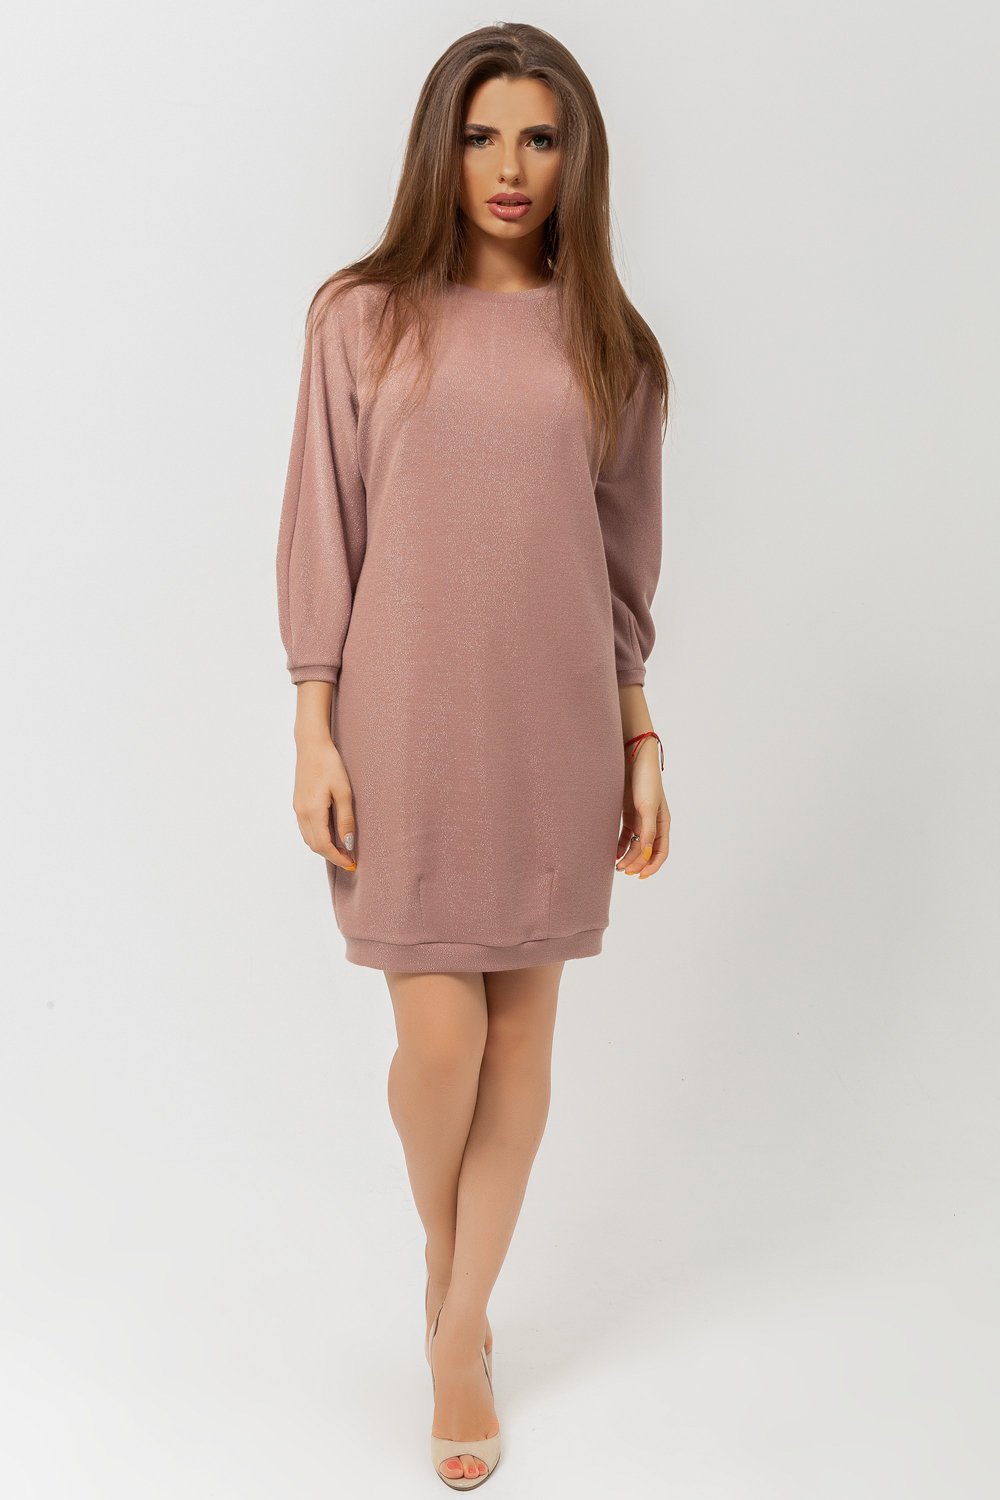 Knitted dress in cappuccino colour